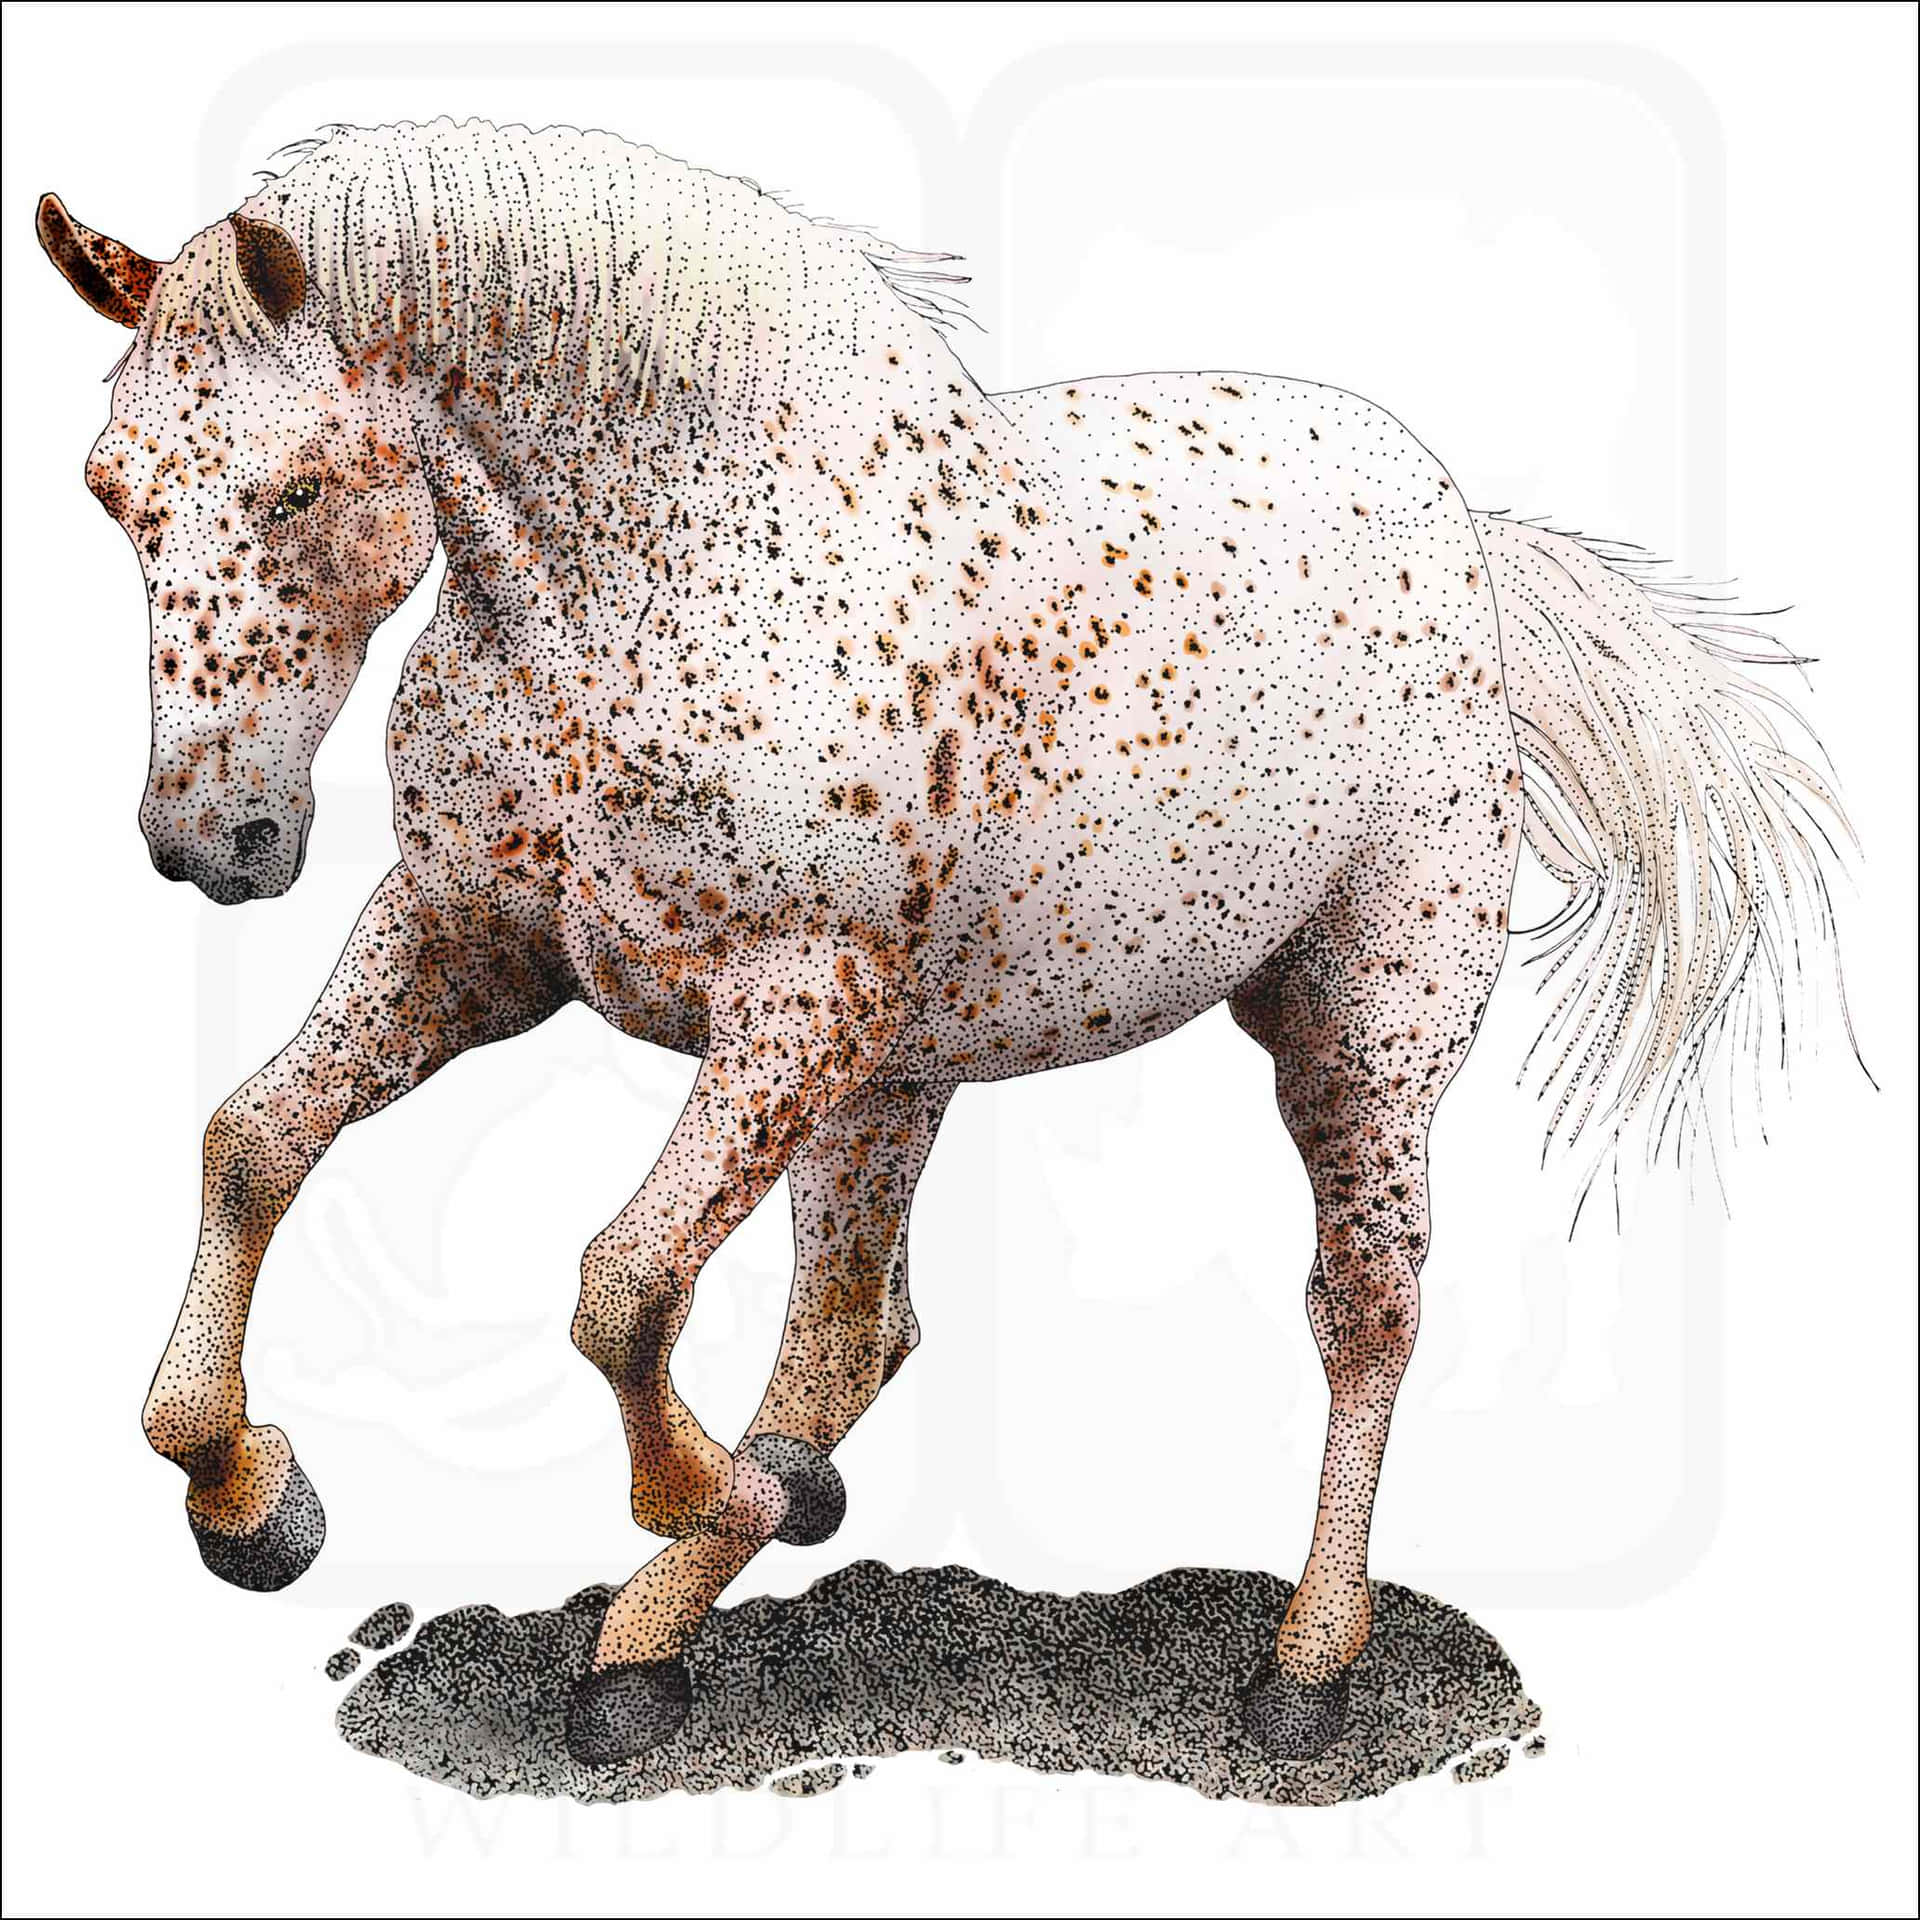 A Horse With White Spots Running On The Ground